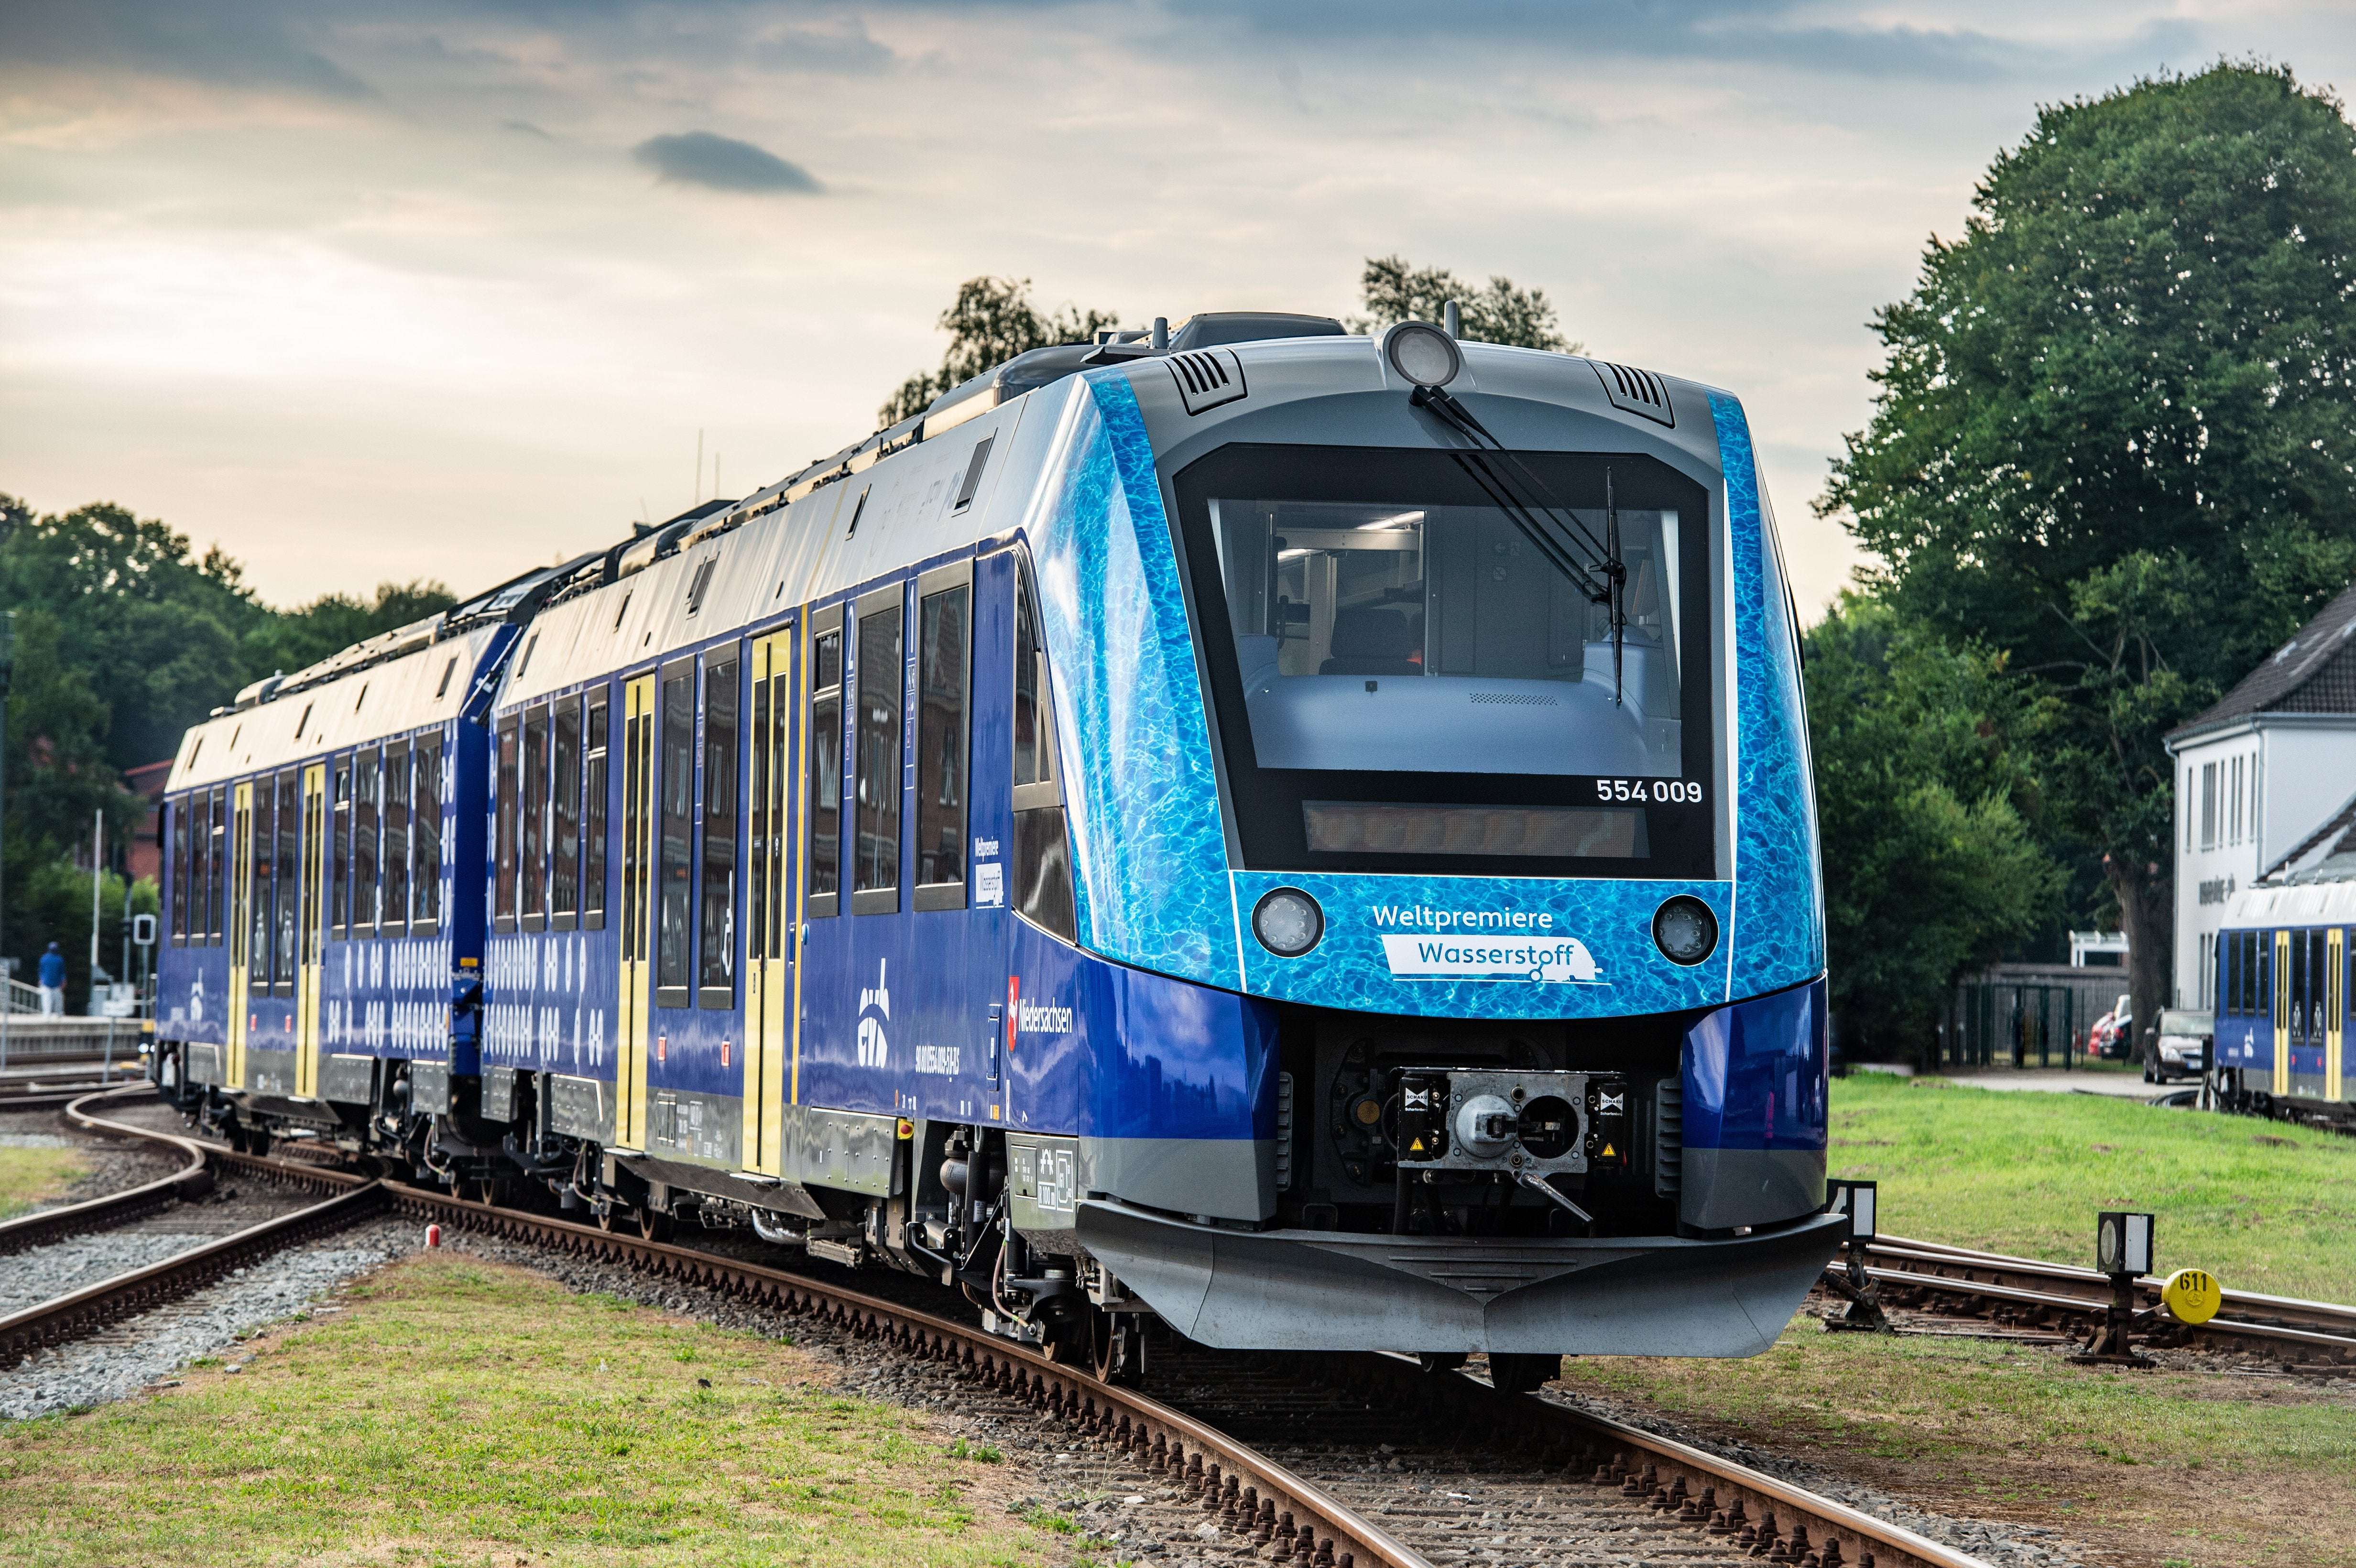 image for The first fully hydrogen-powered passenger train service is now running in Germany